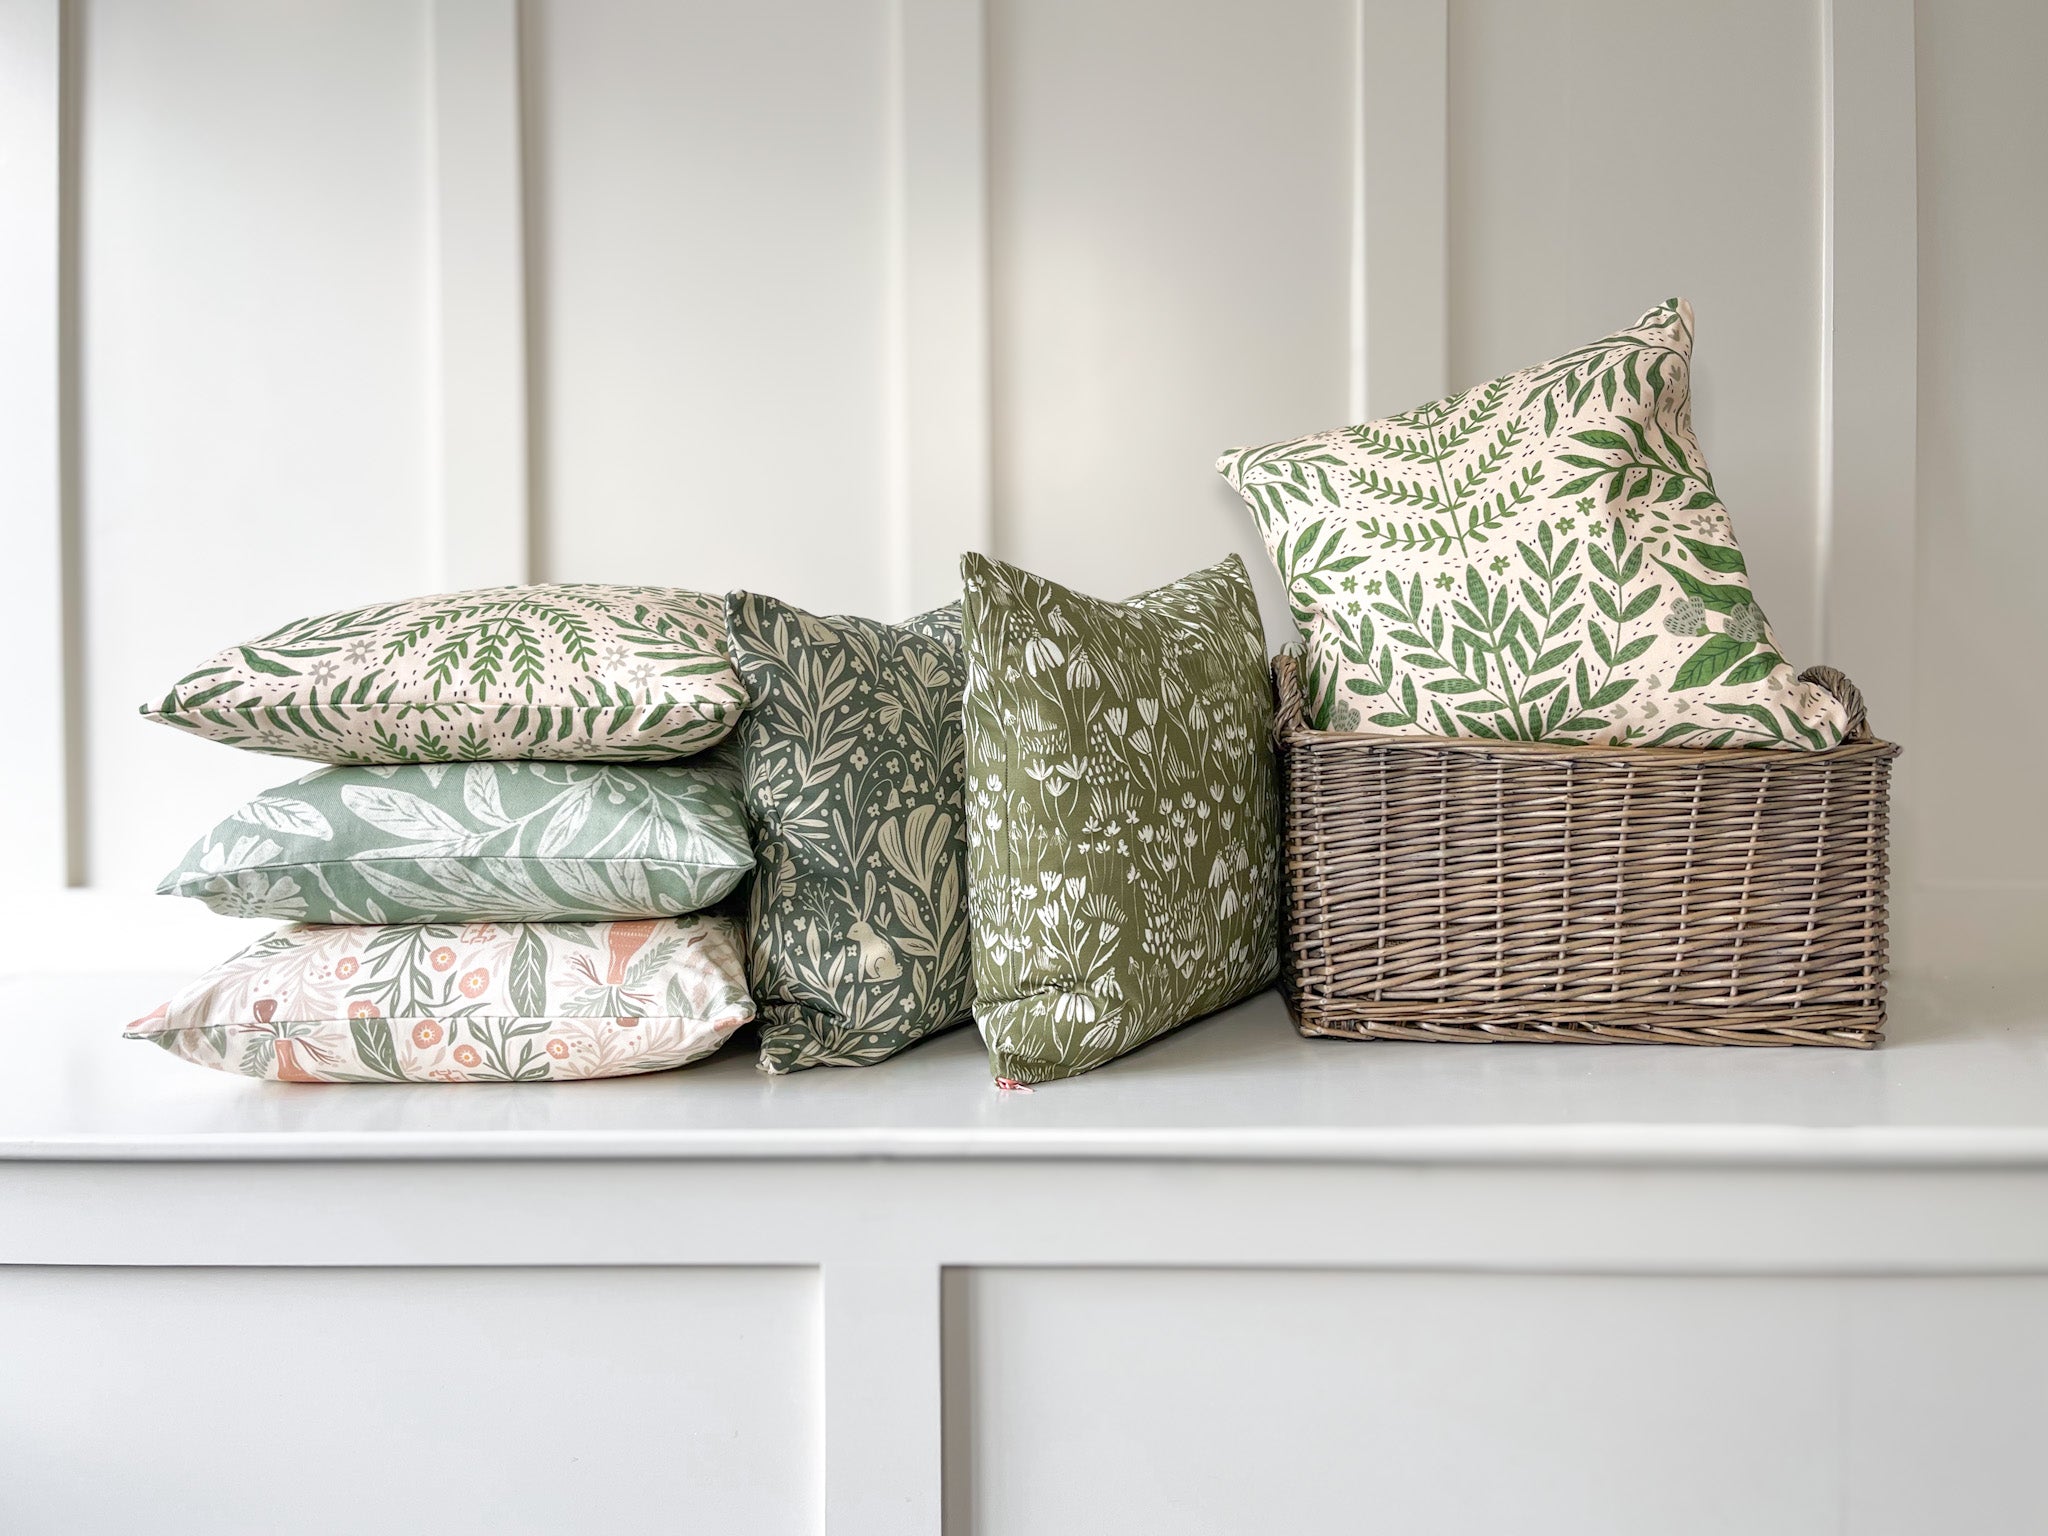 NATURE-INSPIRED-DECORATIVE-CUSHIONS-AND-BOTANICAL-SCATTER-CUSHIONS